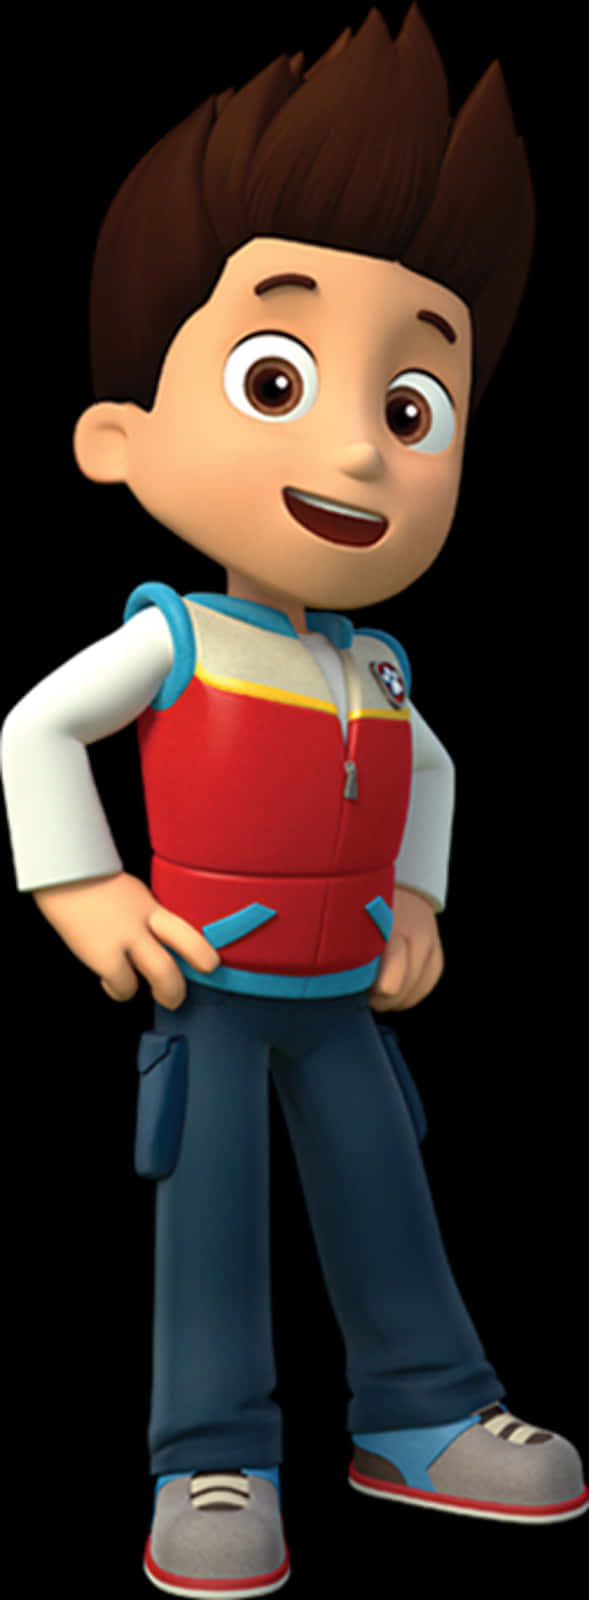 A Cartoon Character With A Red Vest